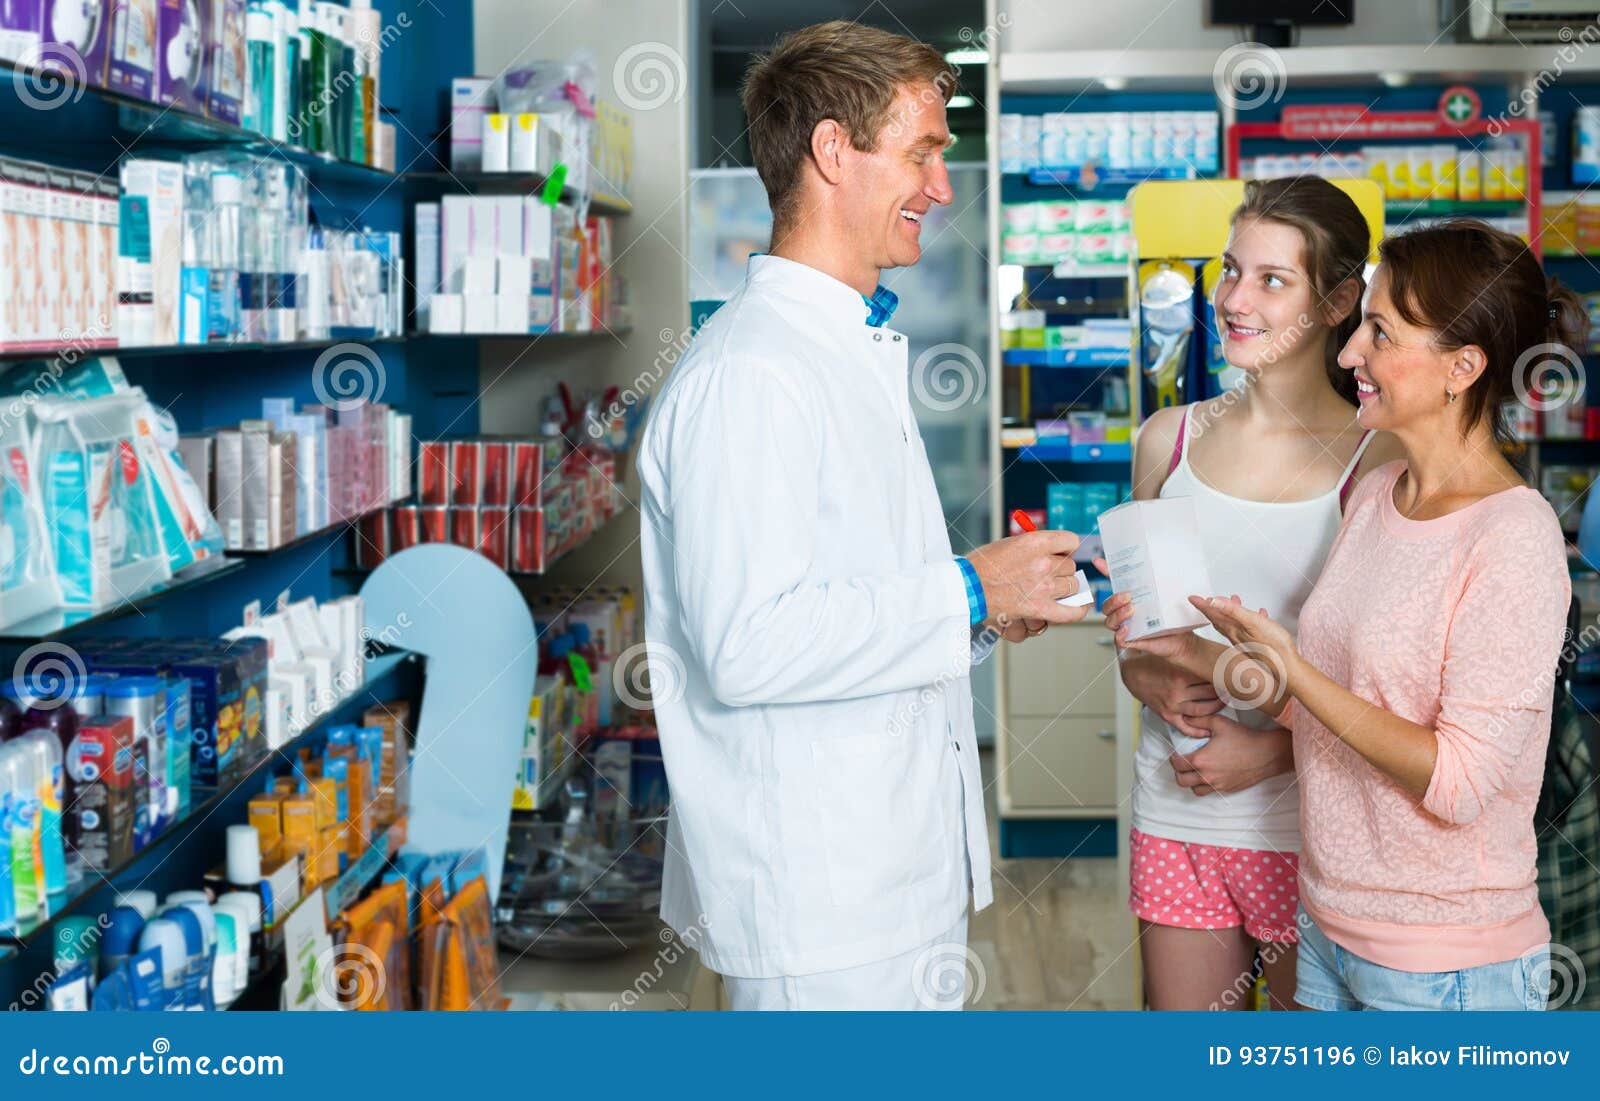 Man Pharmacist in Pharmaceutical Shop Stock Photo - Image of helping ...